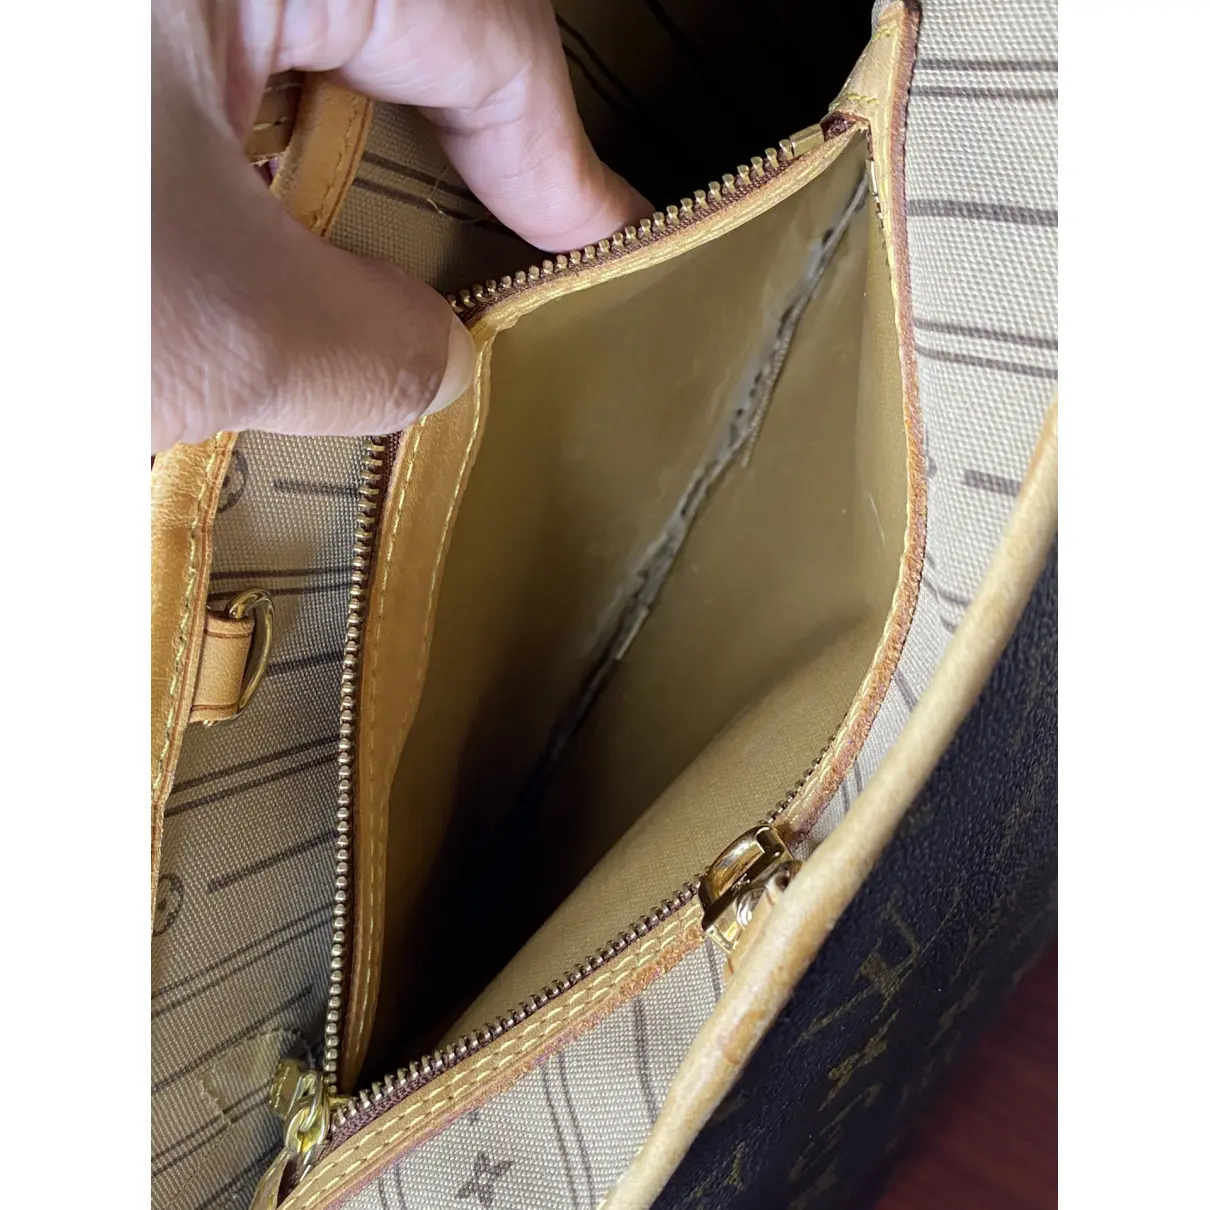 Buy Louis Vuitton Neverfull leather tote online - Vintage